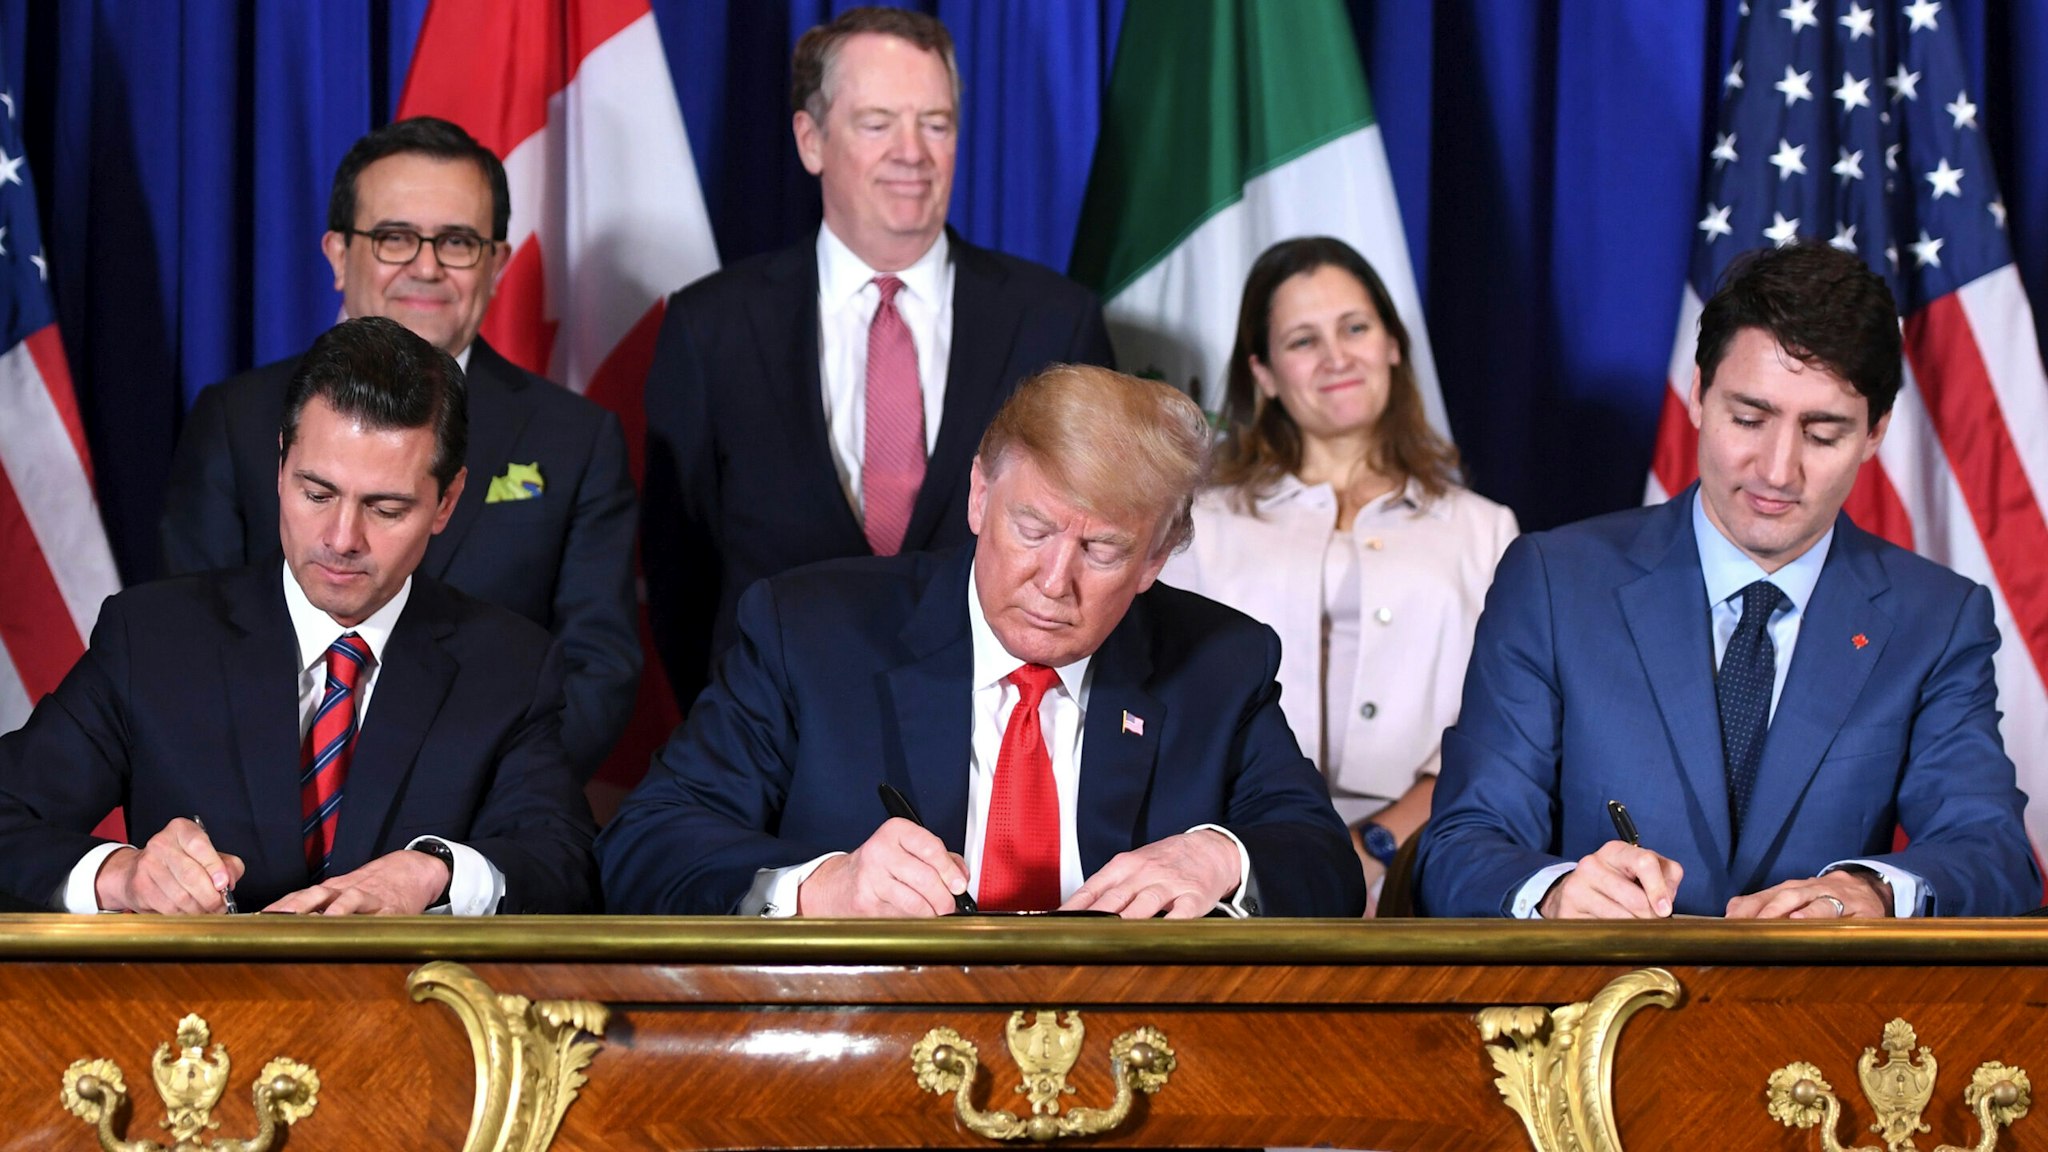 Mexico's President Enrique Pena Nieto (L) US President Donald Trump (C) and Canadian Prime Minister Justin Trudeau, sign a new free trade agreement in Buenos Aires, on November 30, 2018, on the sidelines of the G20 Leaders' Summit. - The revamped accord, called the US-Mexico-Canada Agreement (USMCA), looks a lot like the one it replaces. But enough has been tweaked for Trump to declare victory on behalf of the US workers he claims were cheated by NAFTA.